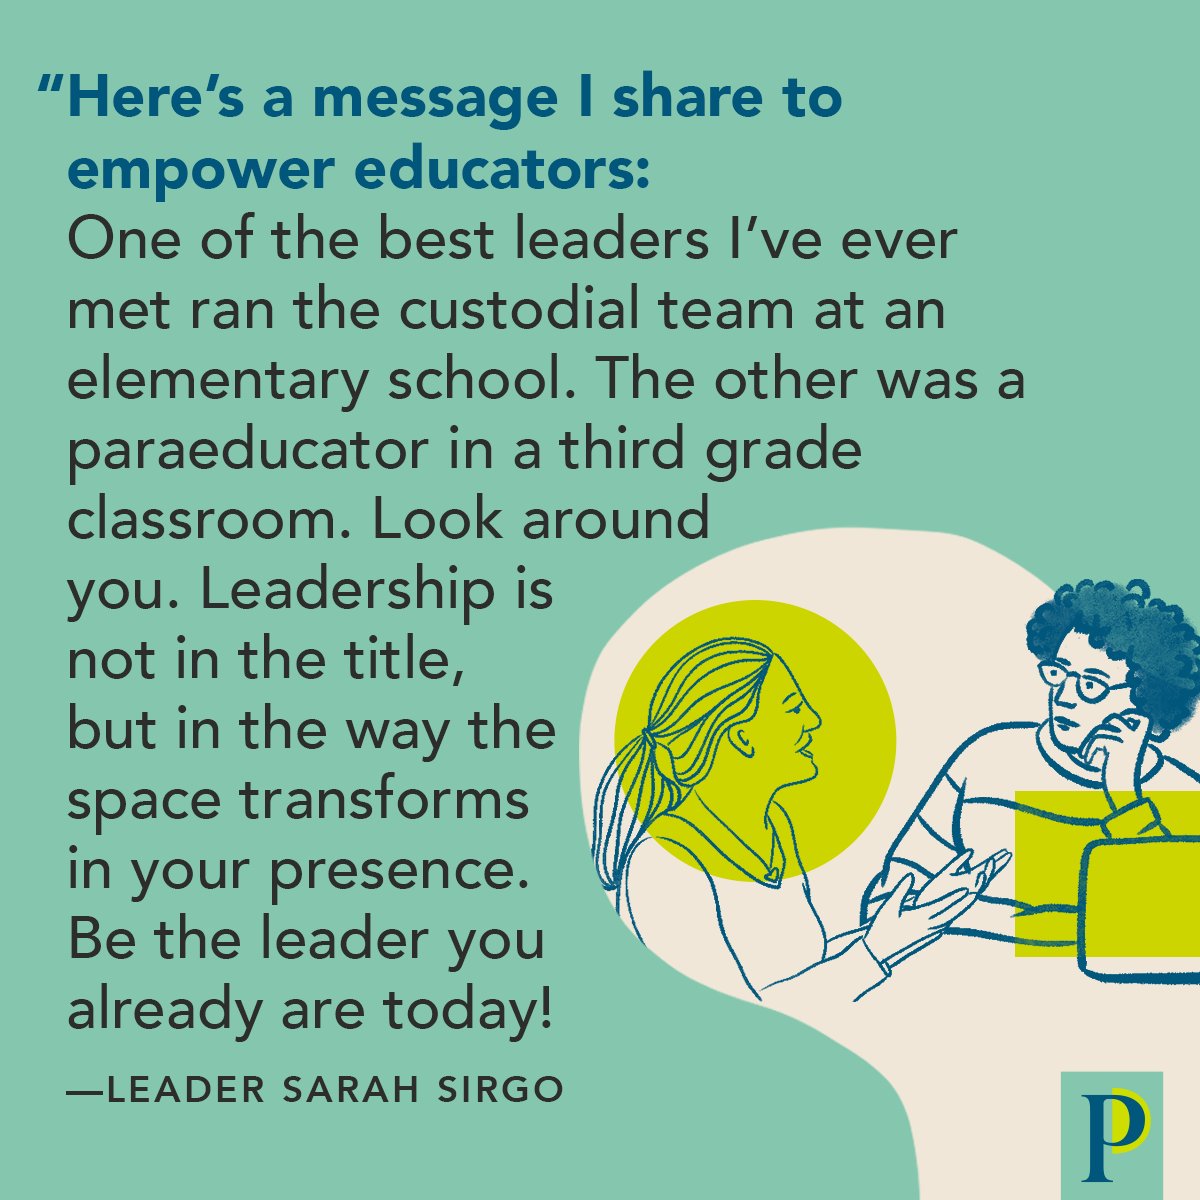 Look around your school community, and you'll find leaders everywhere. (Reminder via leader @Lead2Support)